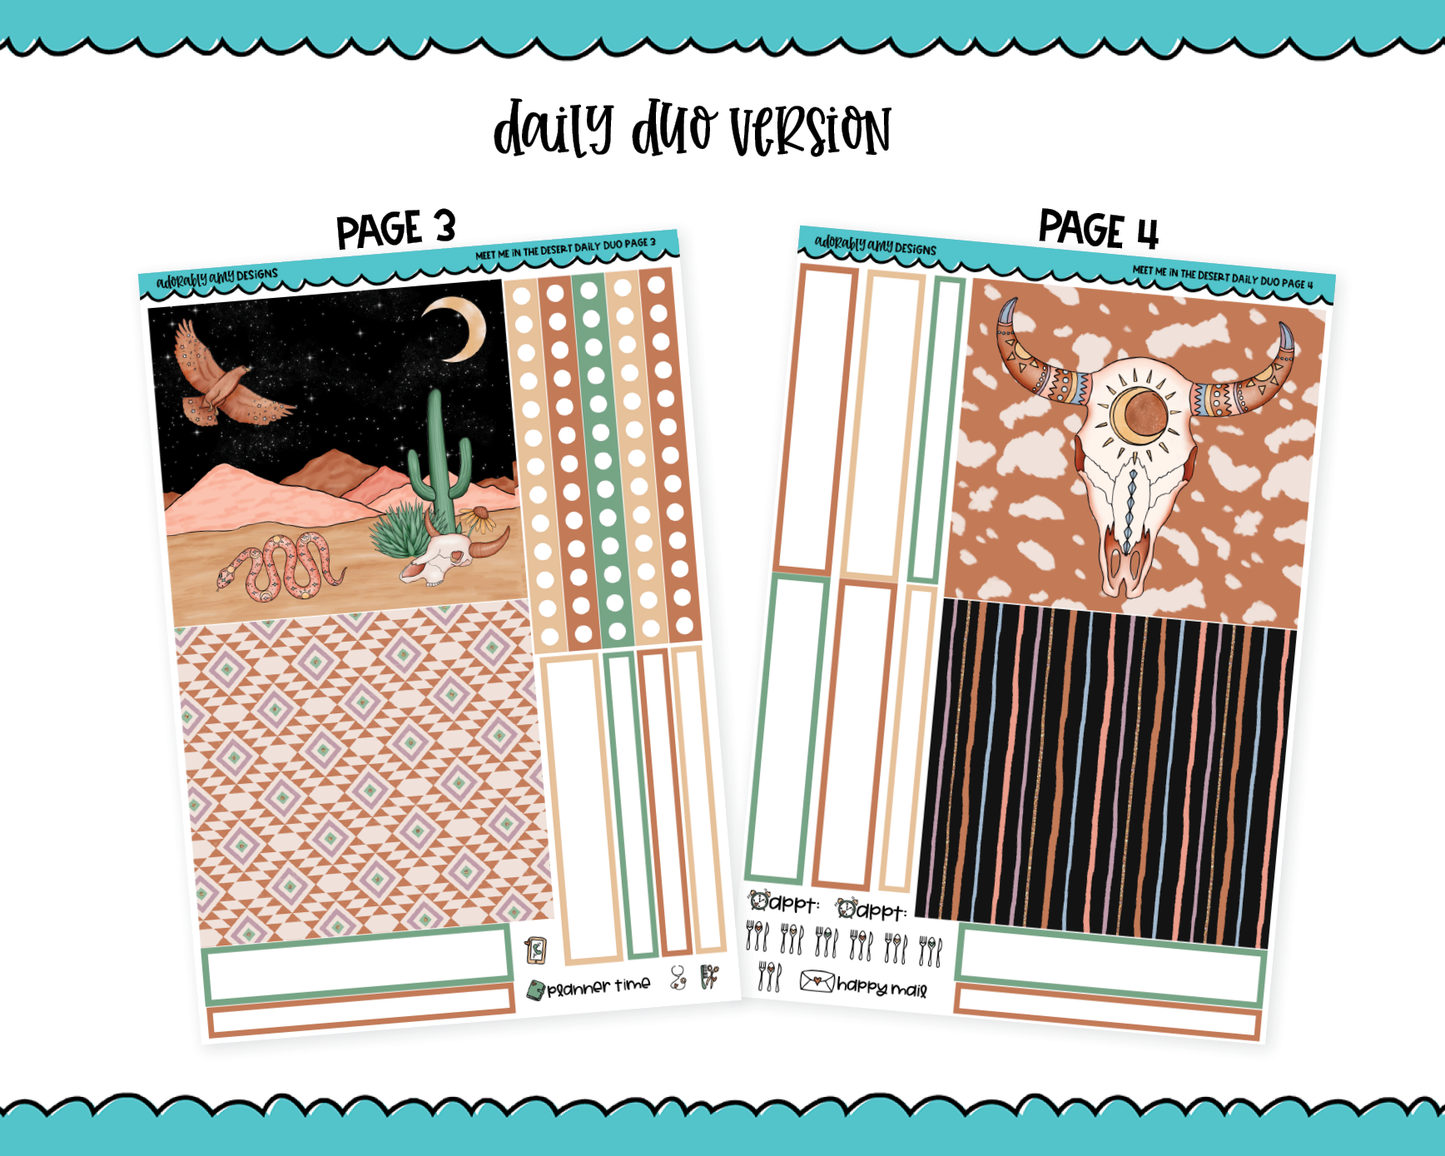 Daily Duo Meet Me in the Desert Themed Weekly Planner Sticker Kit for Daily Duo Planner